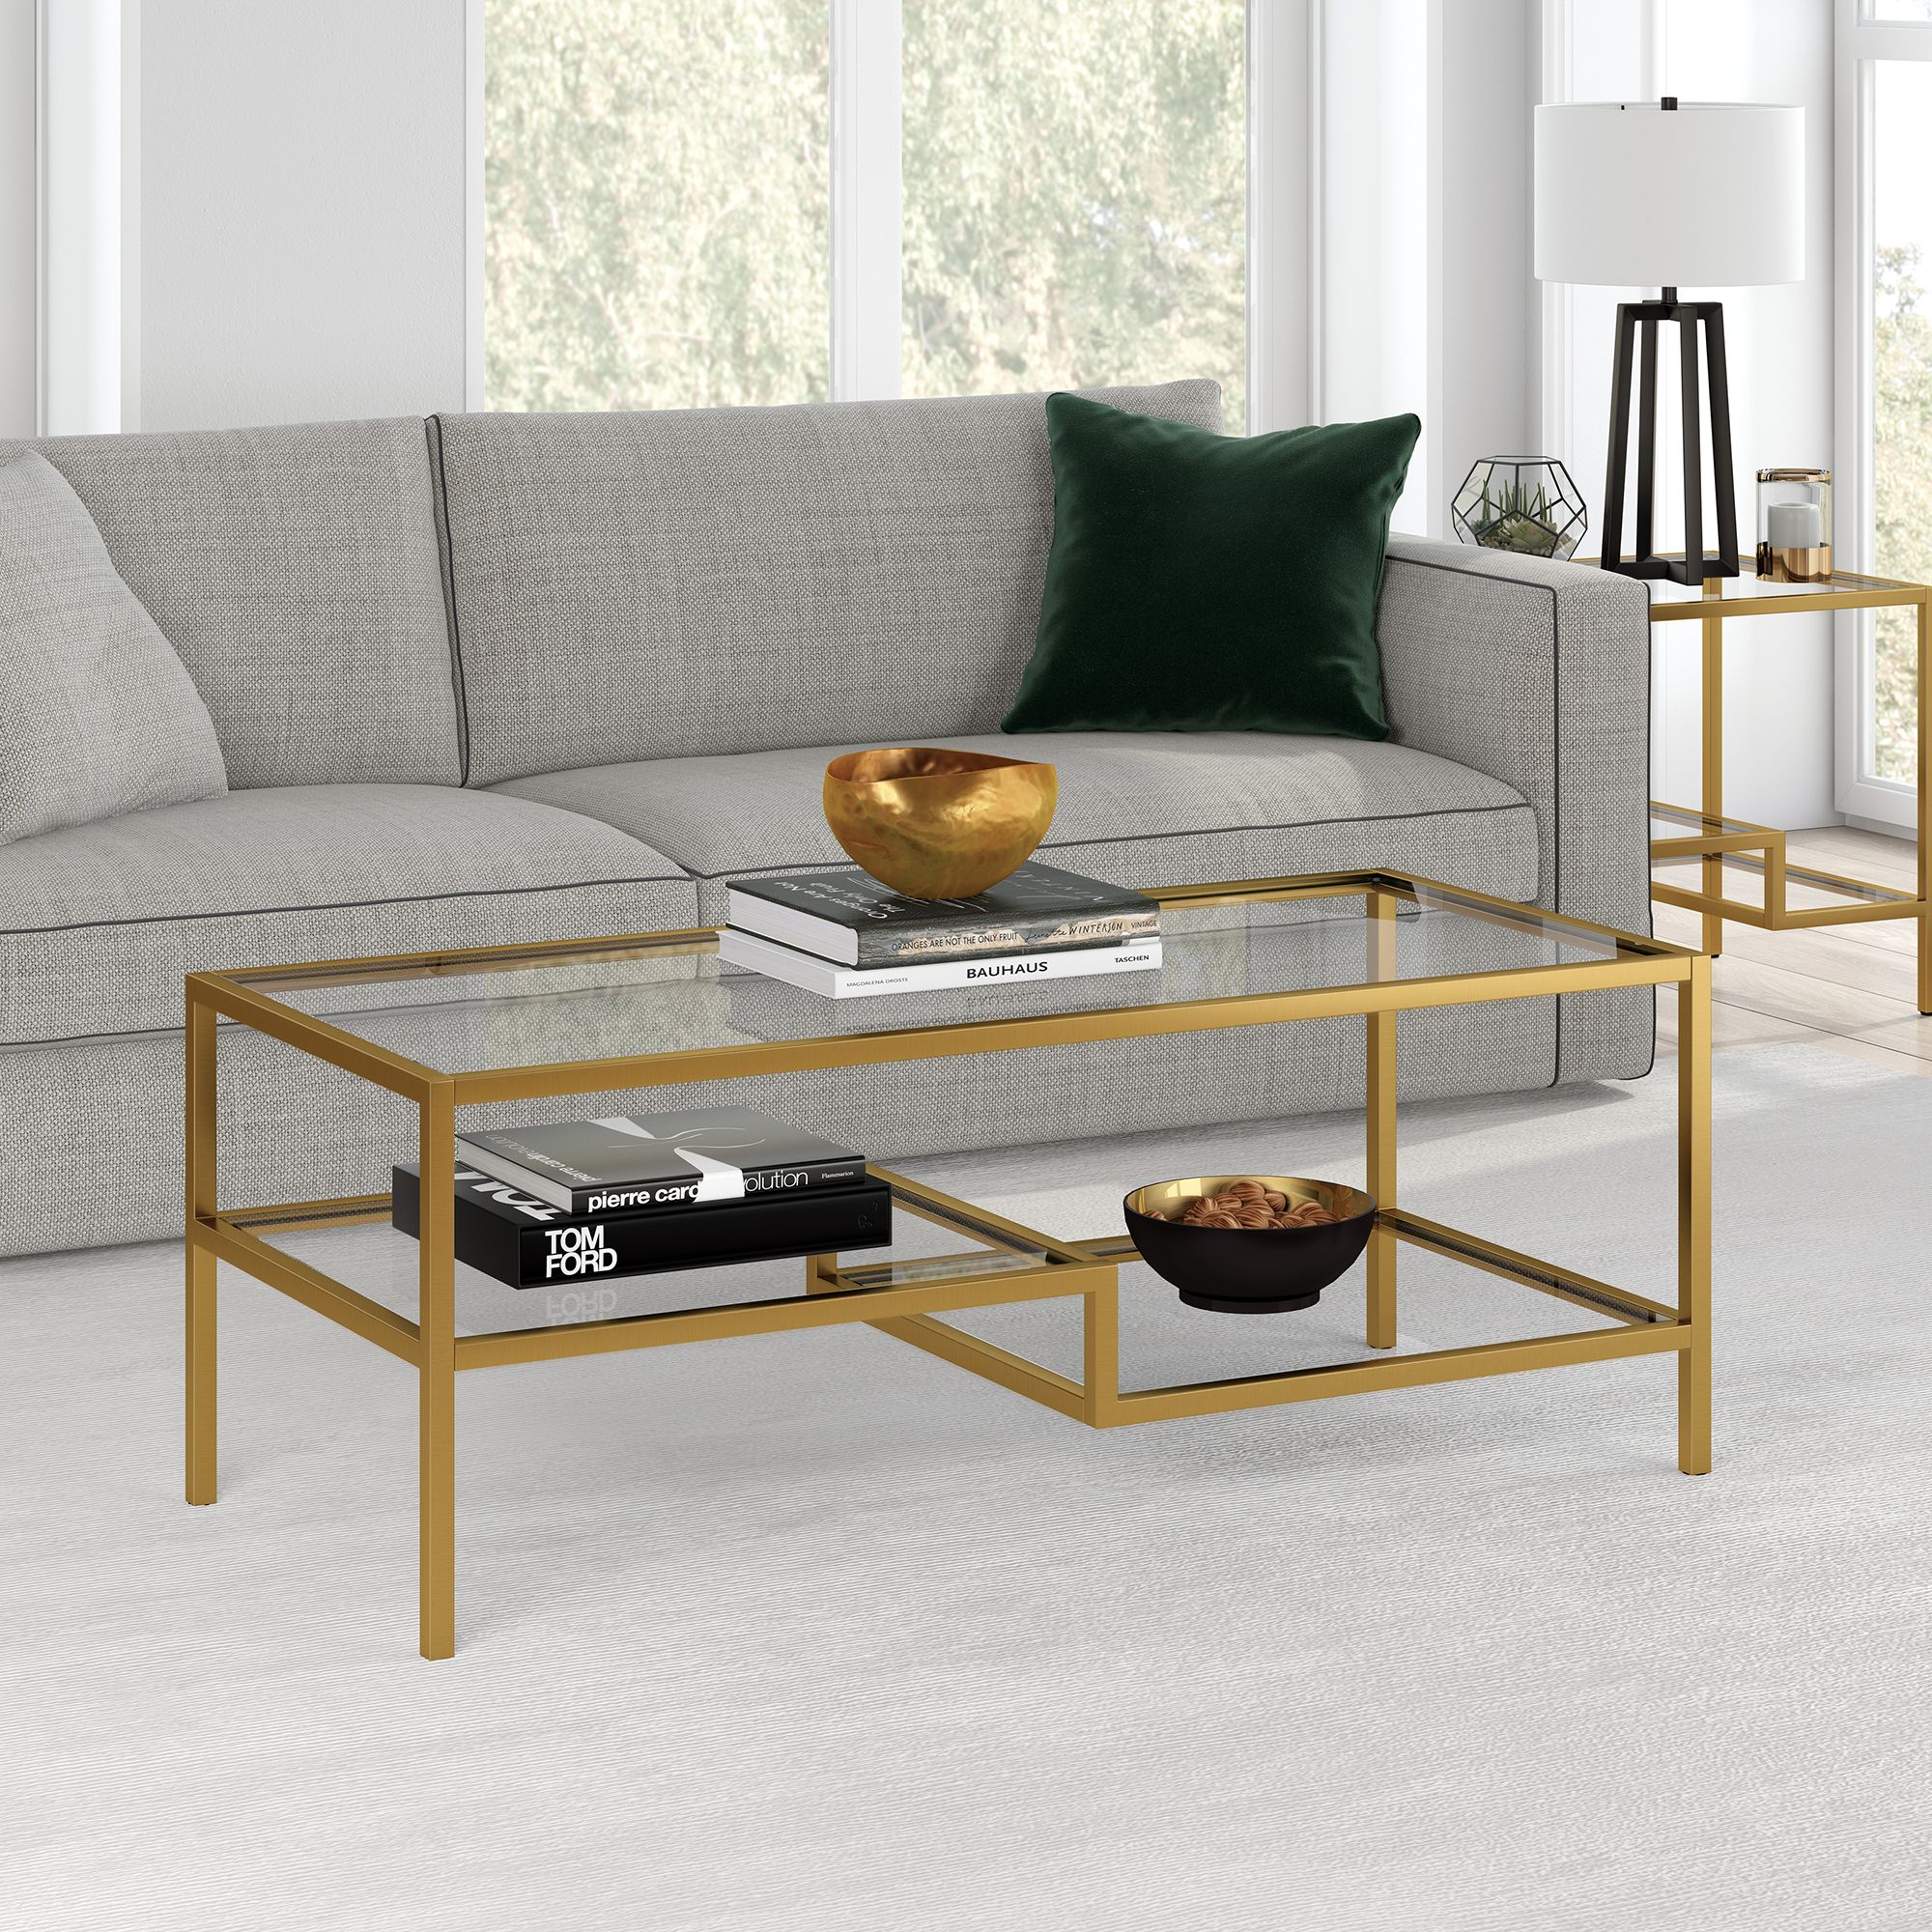 Evelyn&zoe Contemporary 2 Tier Coffee Table With Glass Shelf – Walmart Intended For Modern 2 Tier Coffee Tables Coffee Tables (View 10 of 20)